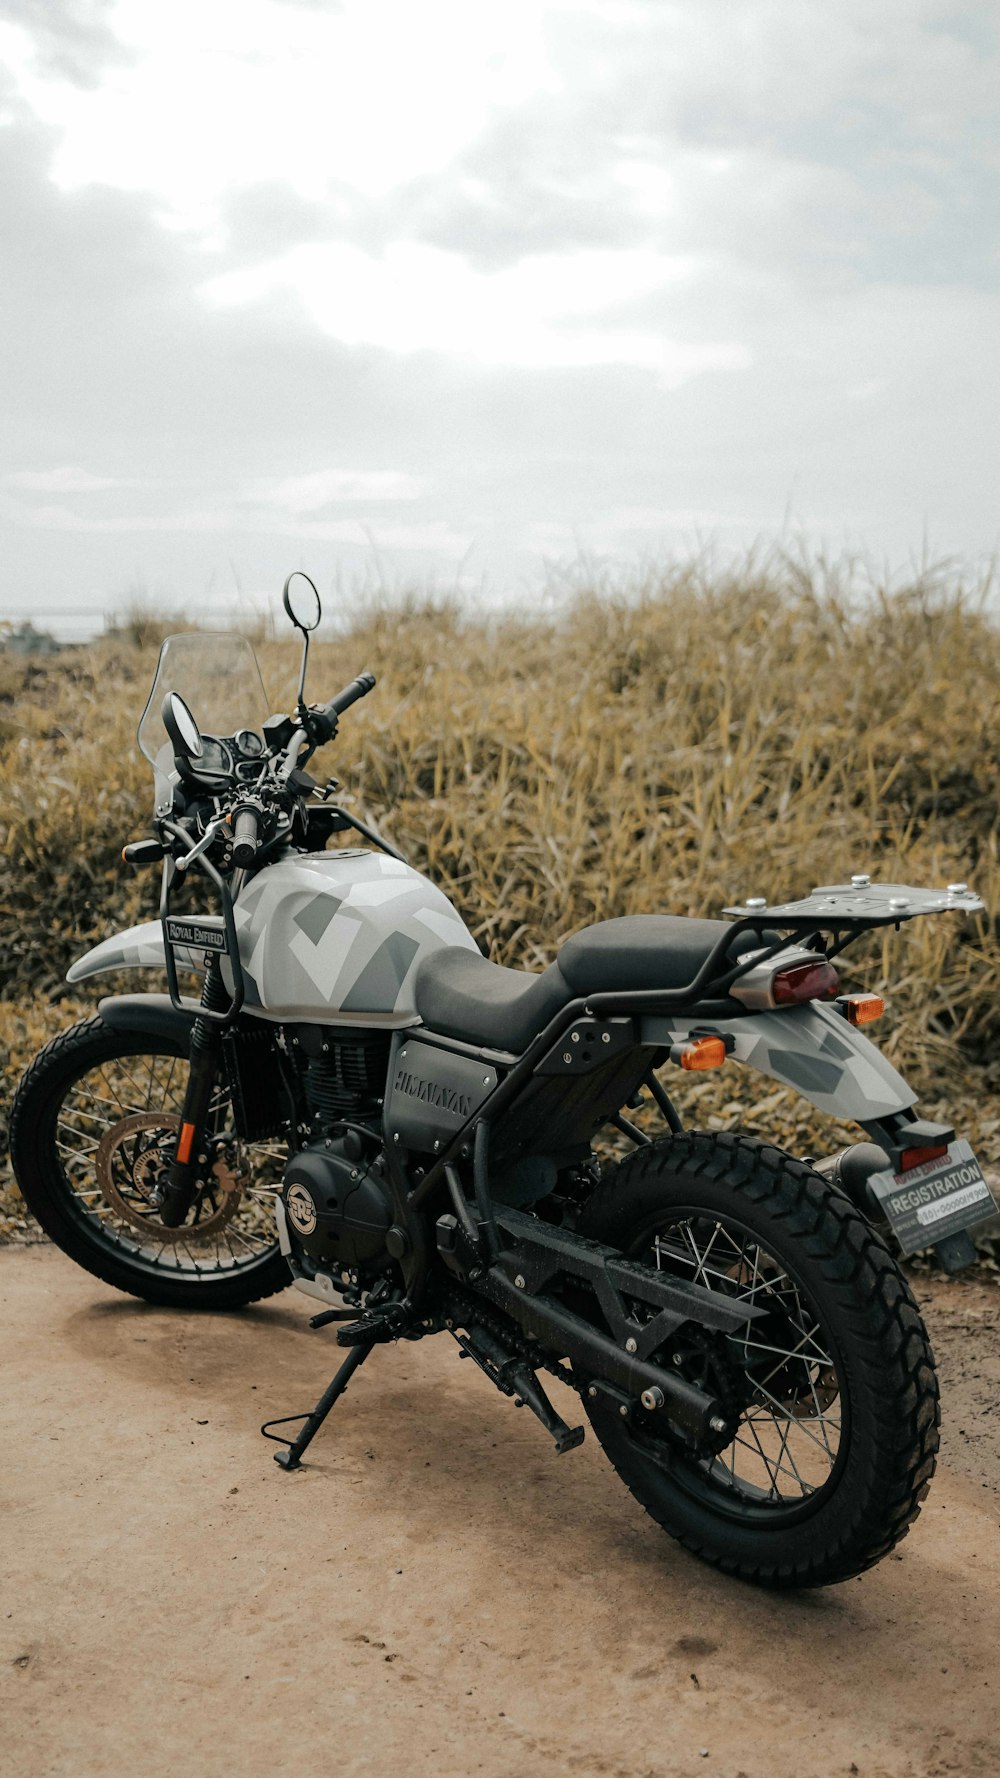 black and gray motorcycle on brown grass field during daytime